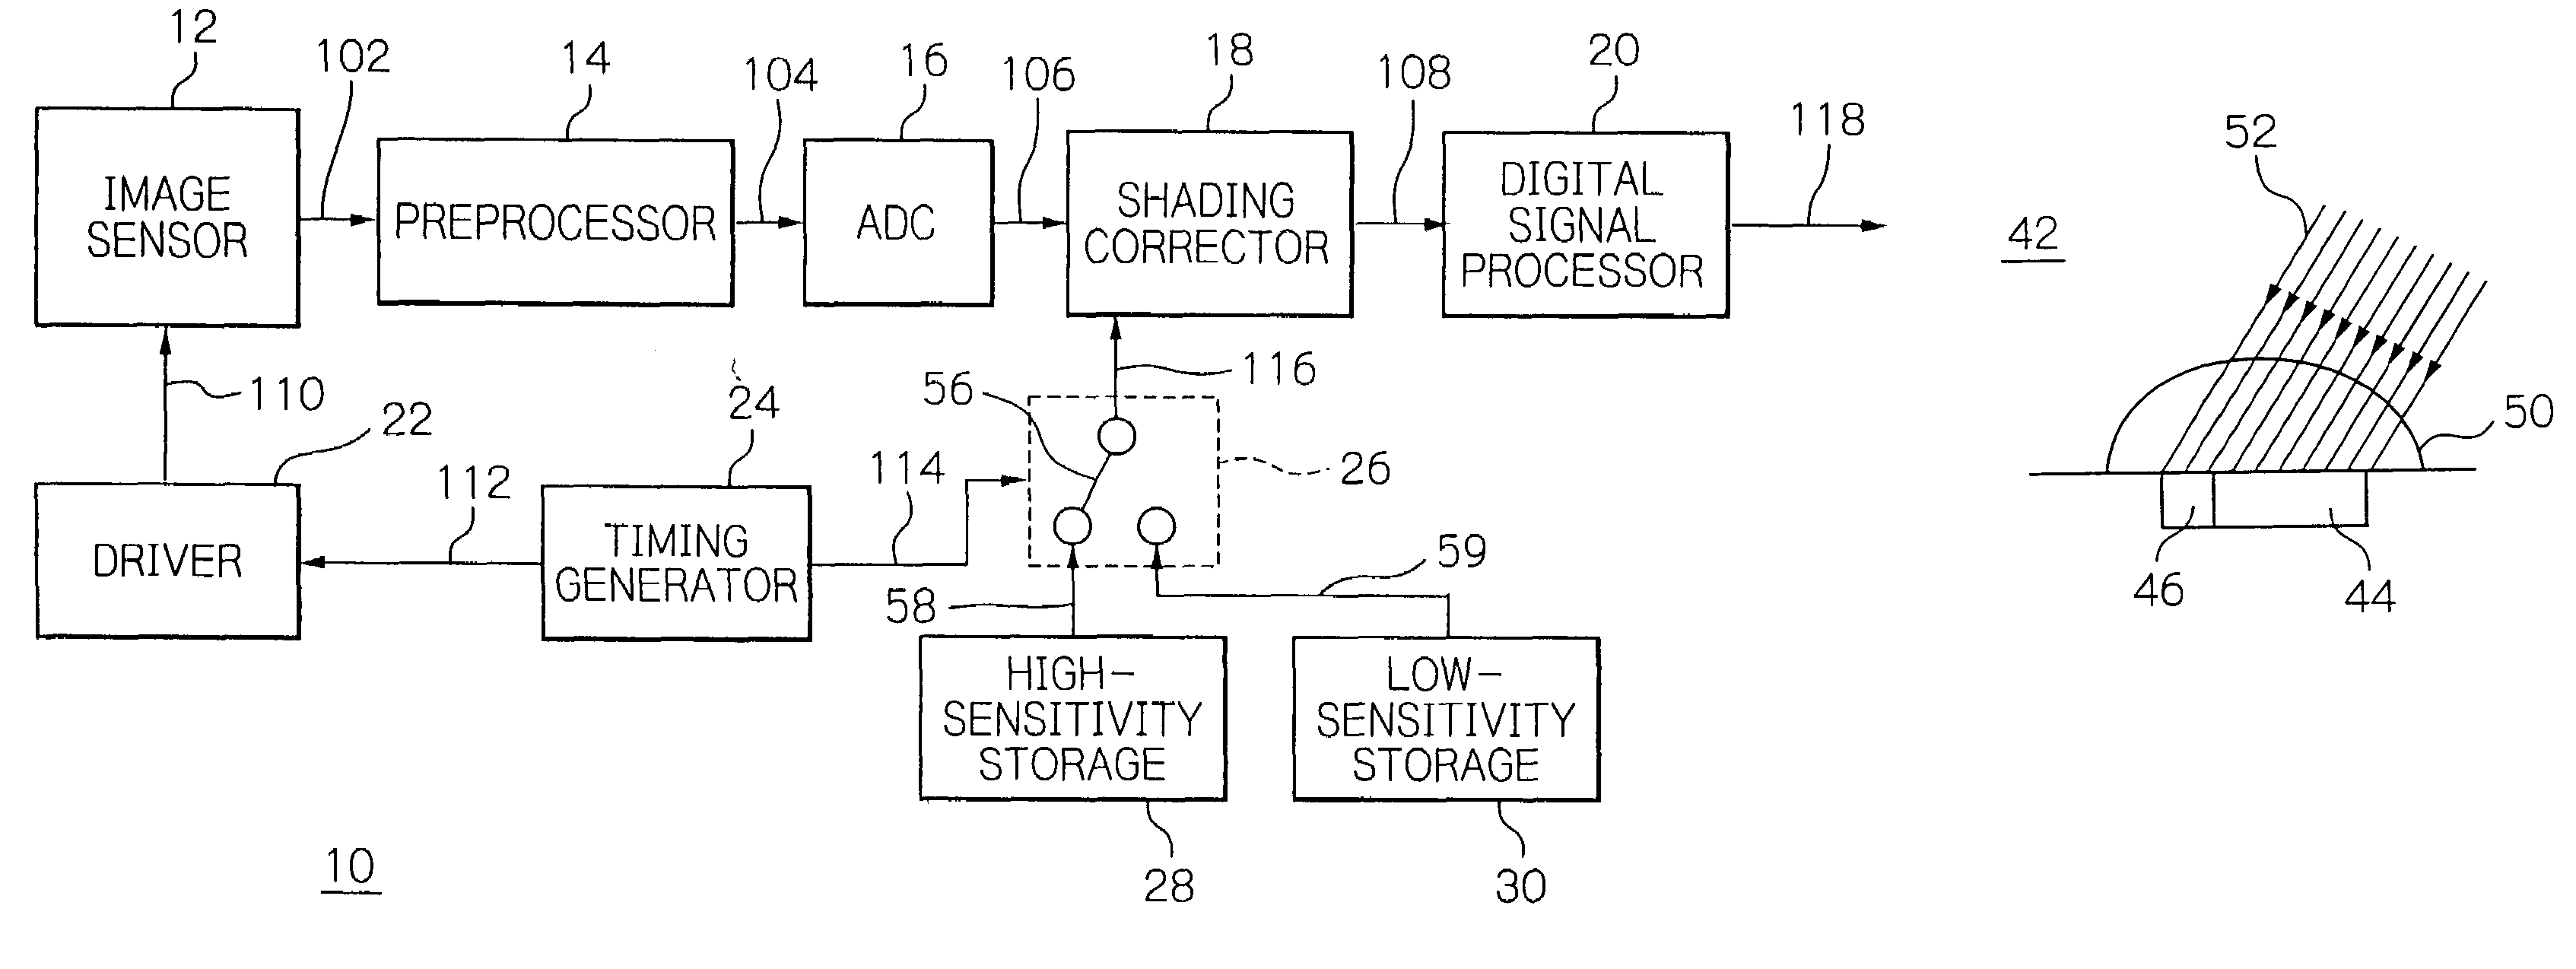 Apparatus for compensating for shading on a picture picked up by a solid-state image sensor over a broad dynamic range